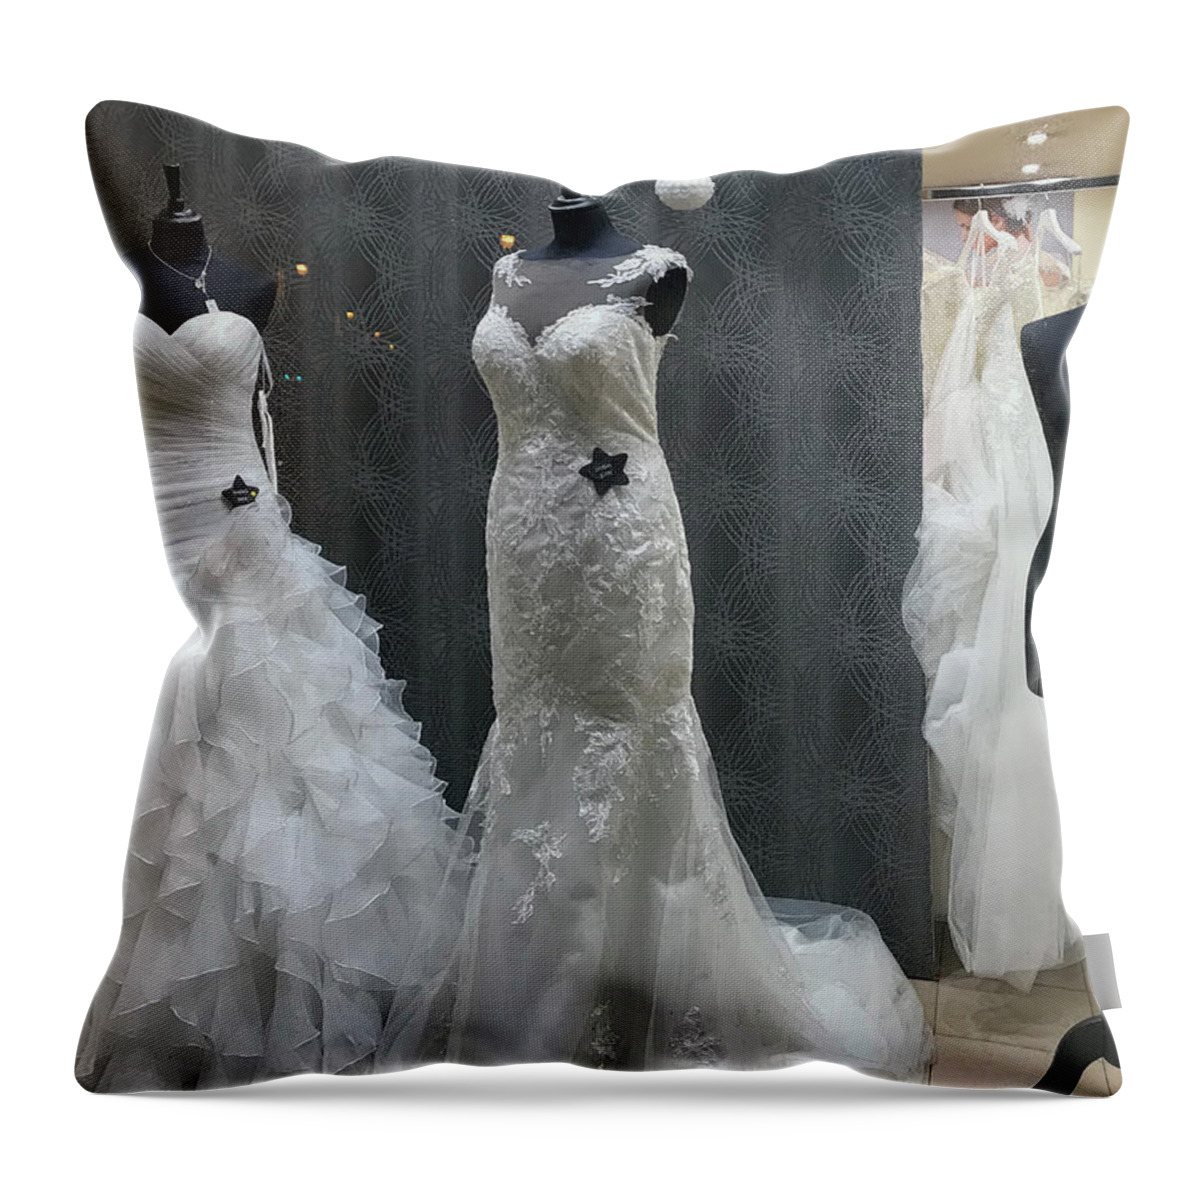 Bridal Ware Throw Pillow featuring the photograph Bridal Ware by Jessica Levant